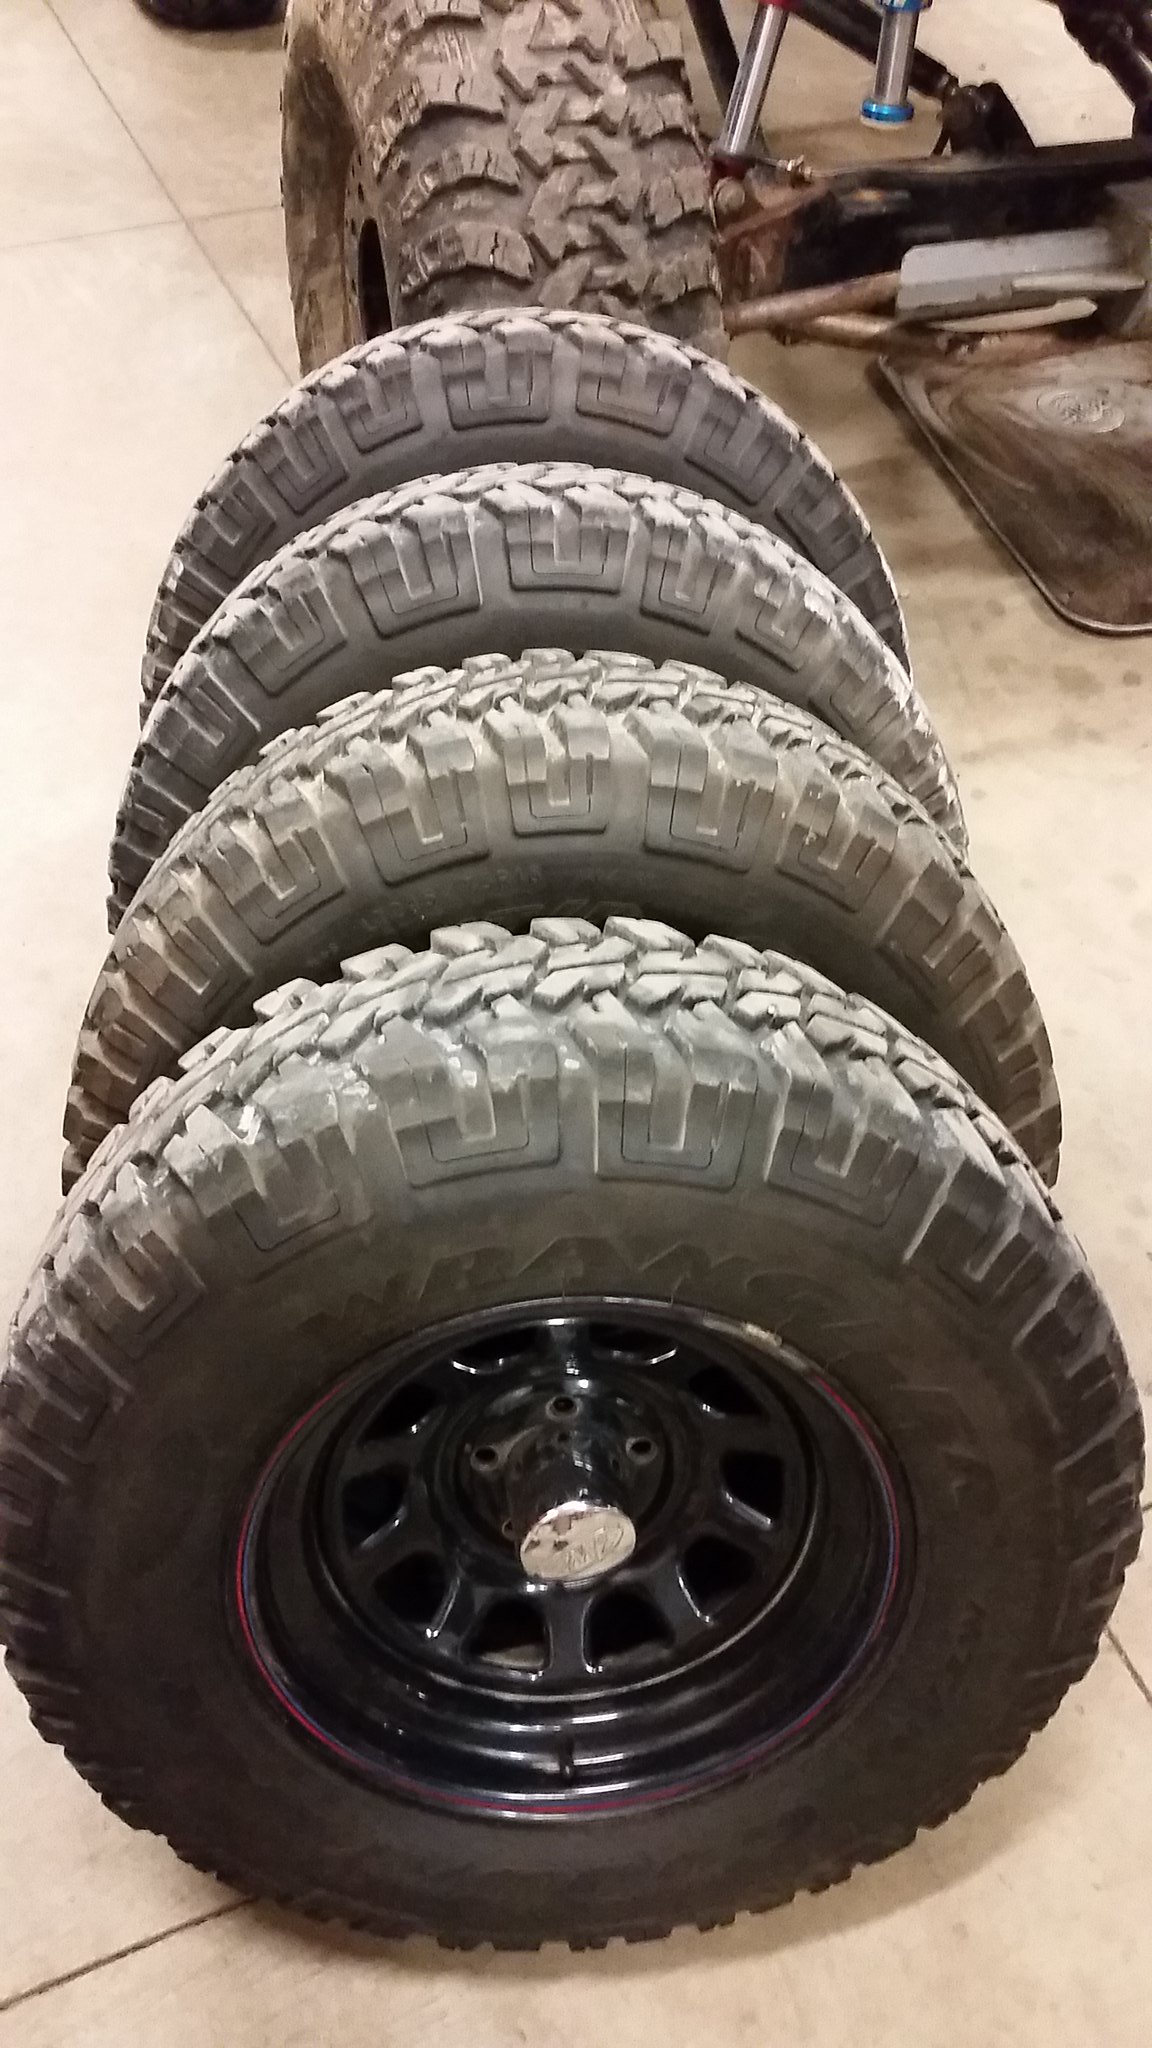 SOLD *** Goodyear Wrangler MT/R 245/75/16 on Steel D Hole Wheels - Set of 4  - $550 | Great Lakes 4x4. The largest offroad forum in the Midwest